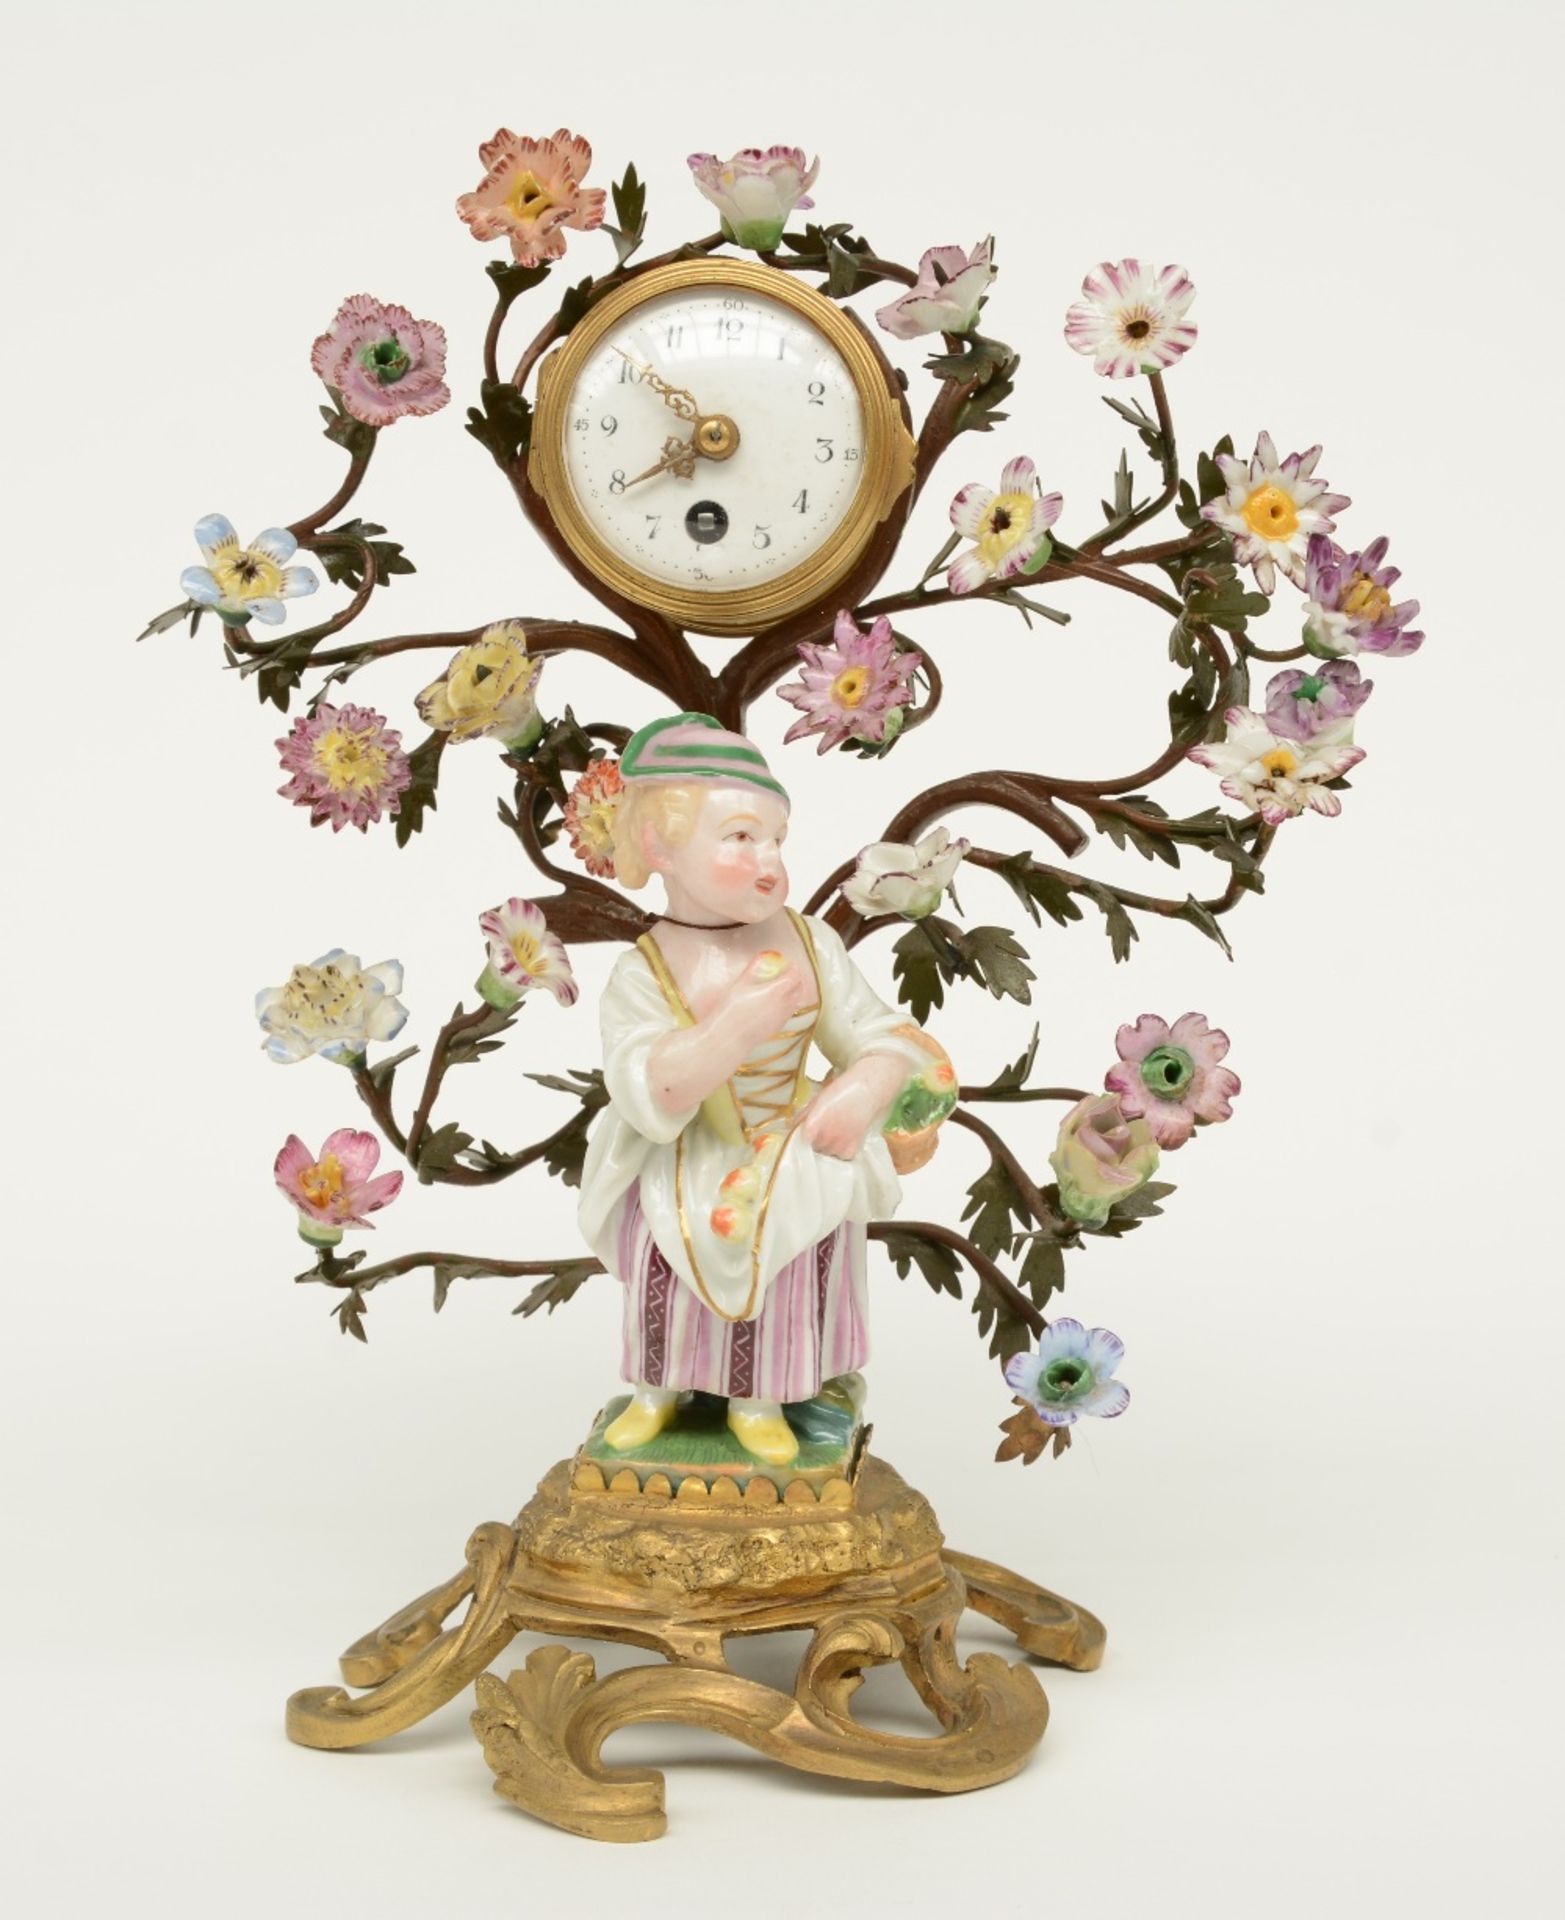 A charming Rococo style mantelclock in the Berlin manner, the bronze mounts gilded and polychrome